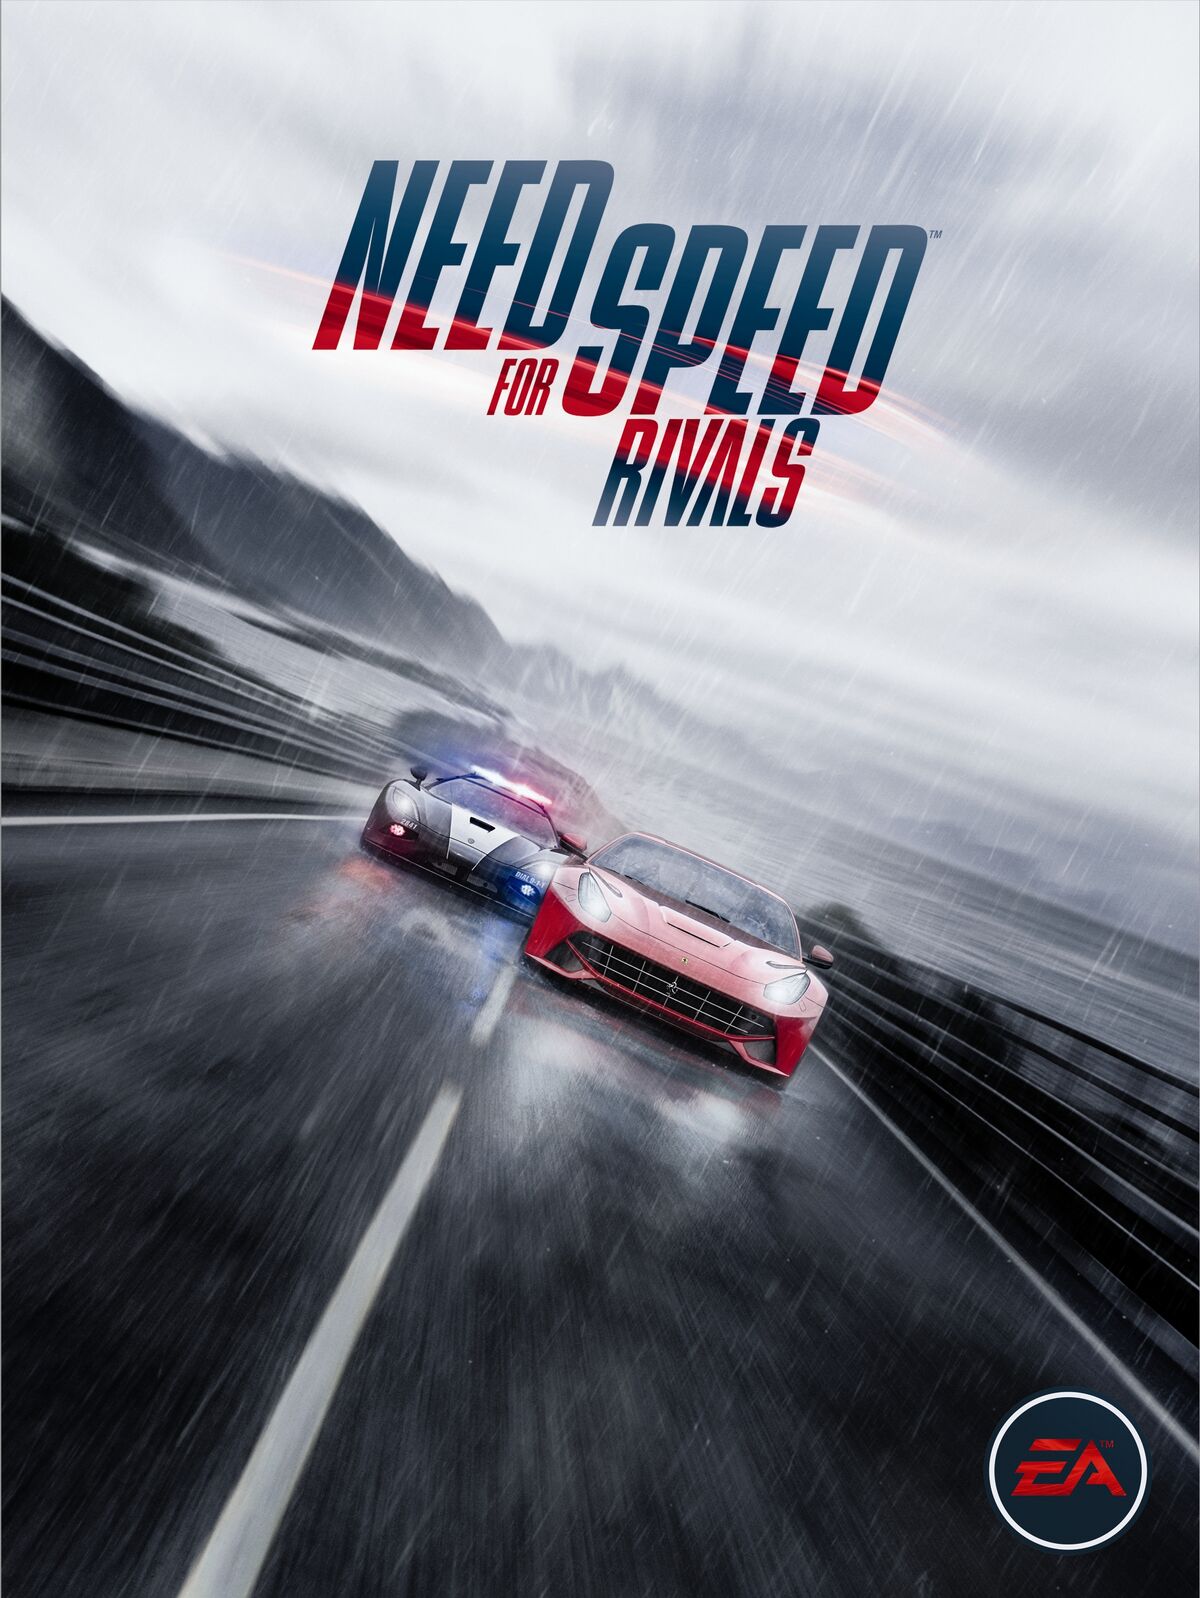 Need for Speed™ Heat - Keys to the Map on Steam